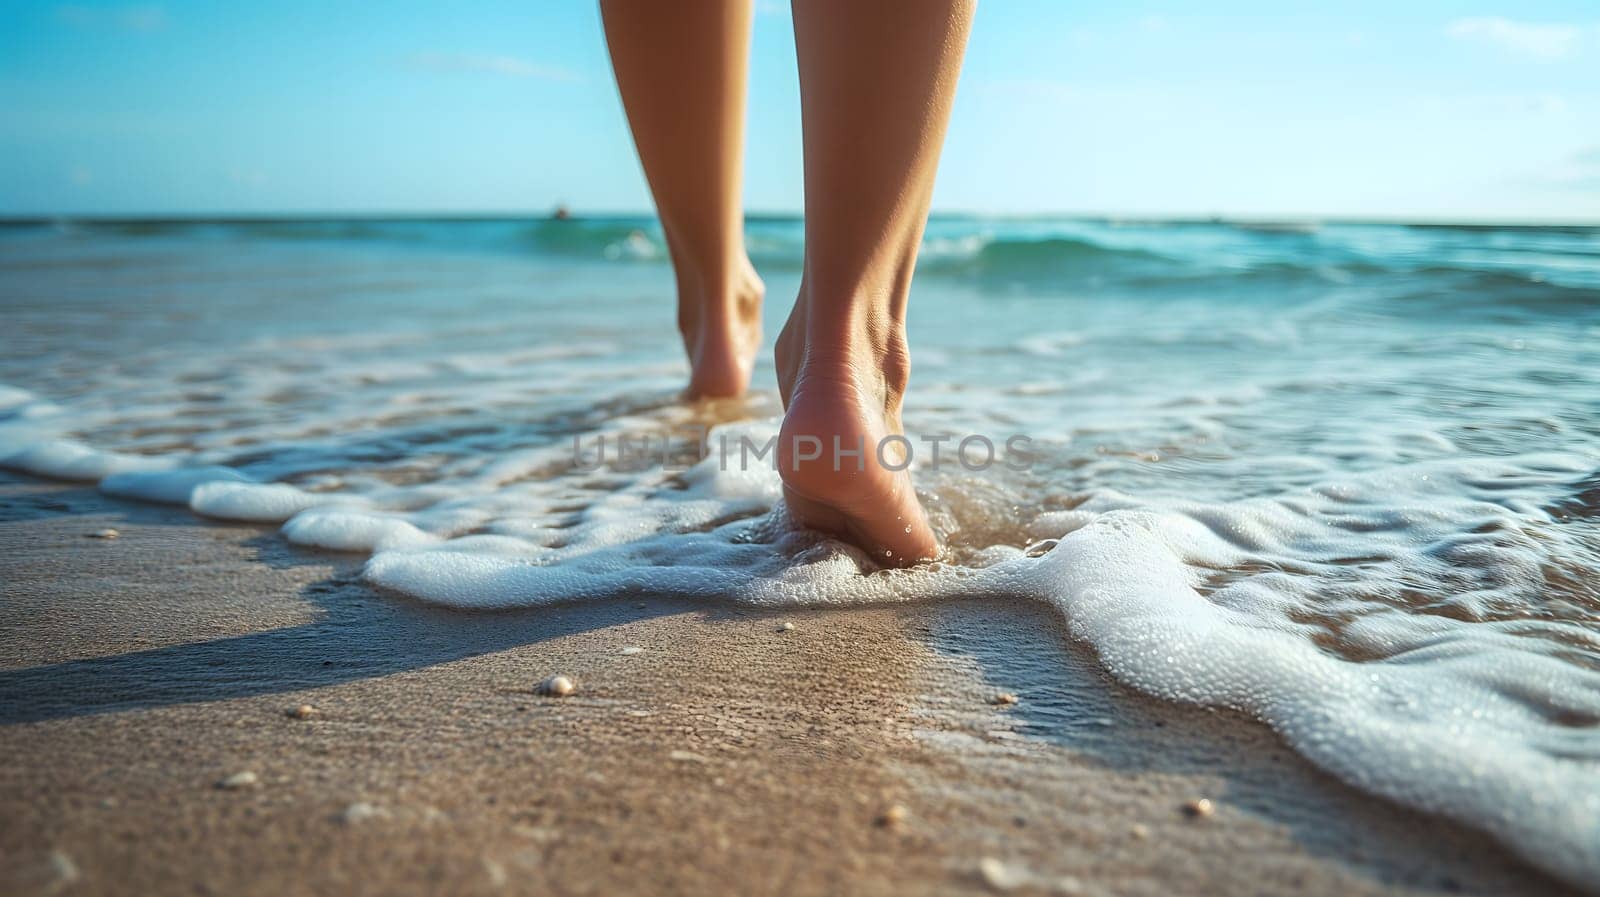 Closeup of woman feet walking on the beach with surf waves at sunny day, rear view. Neural network generated image. Not based on any actual scene or pattern.